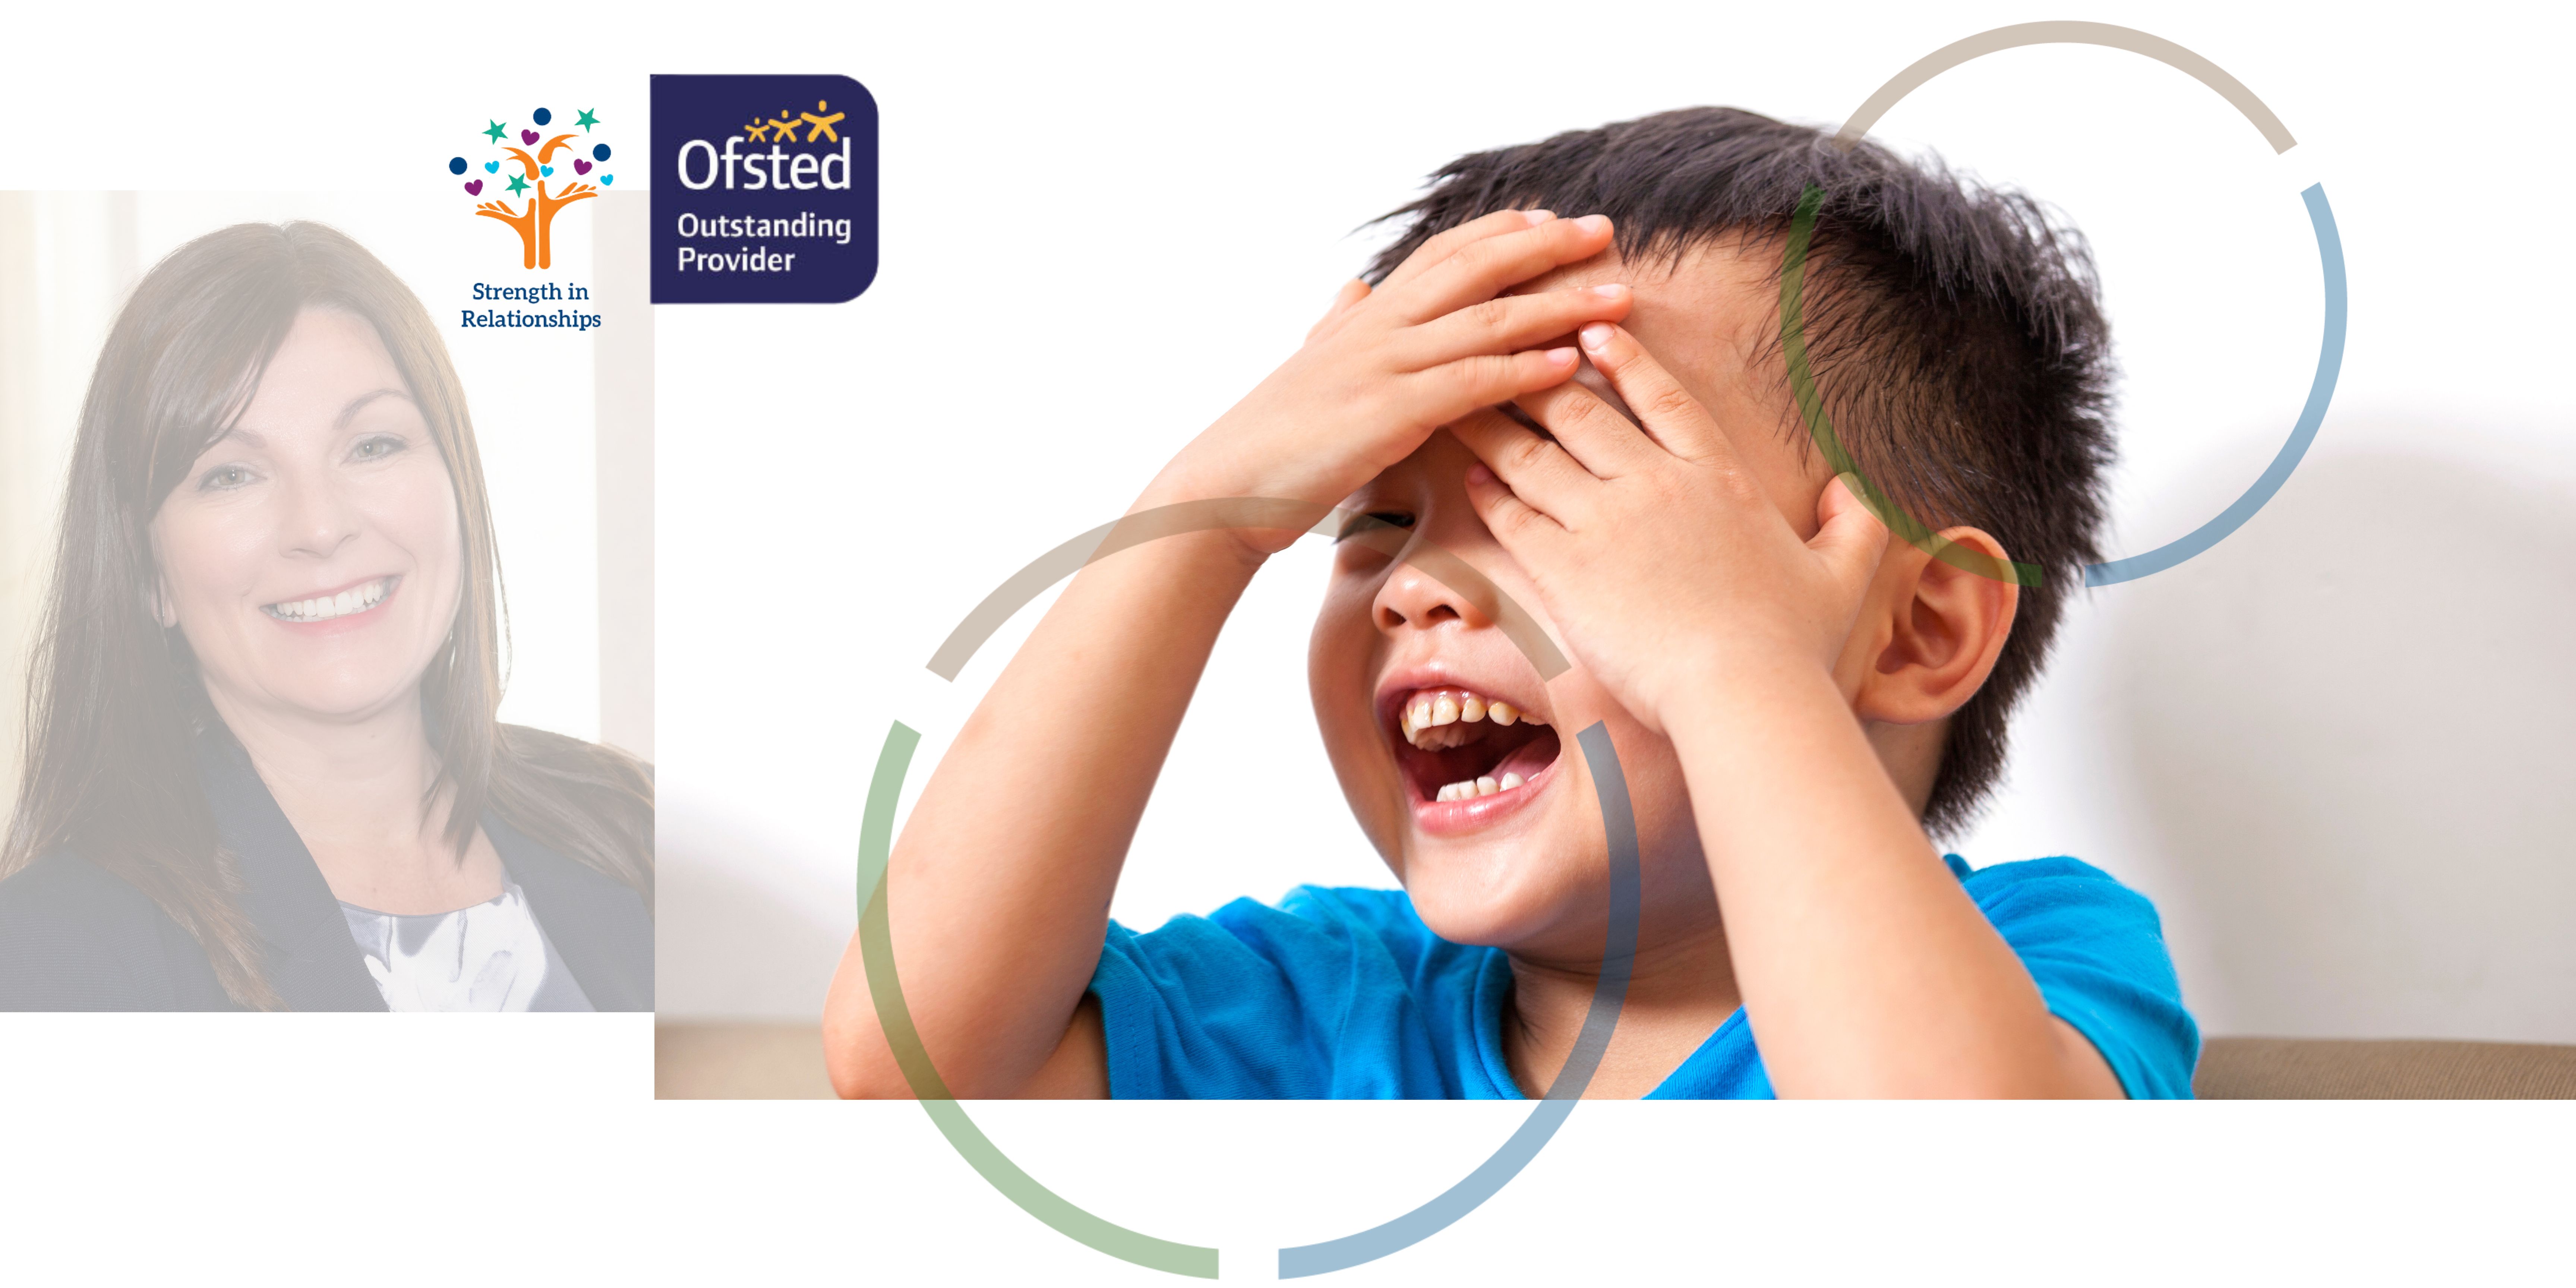 A portrait photograph of a member of the children and families social work team next to an image of a child laughing with the Ofsted and strength in relationships logos.